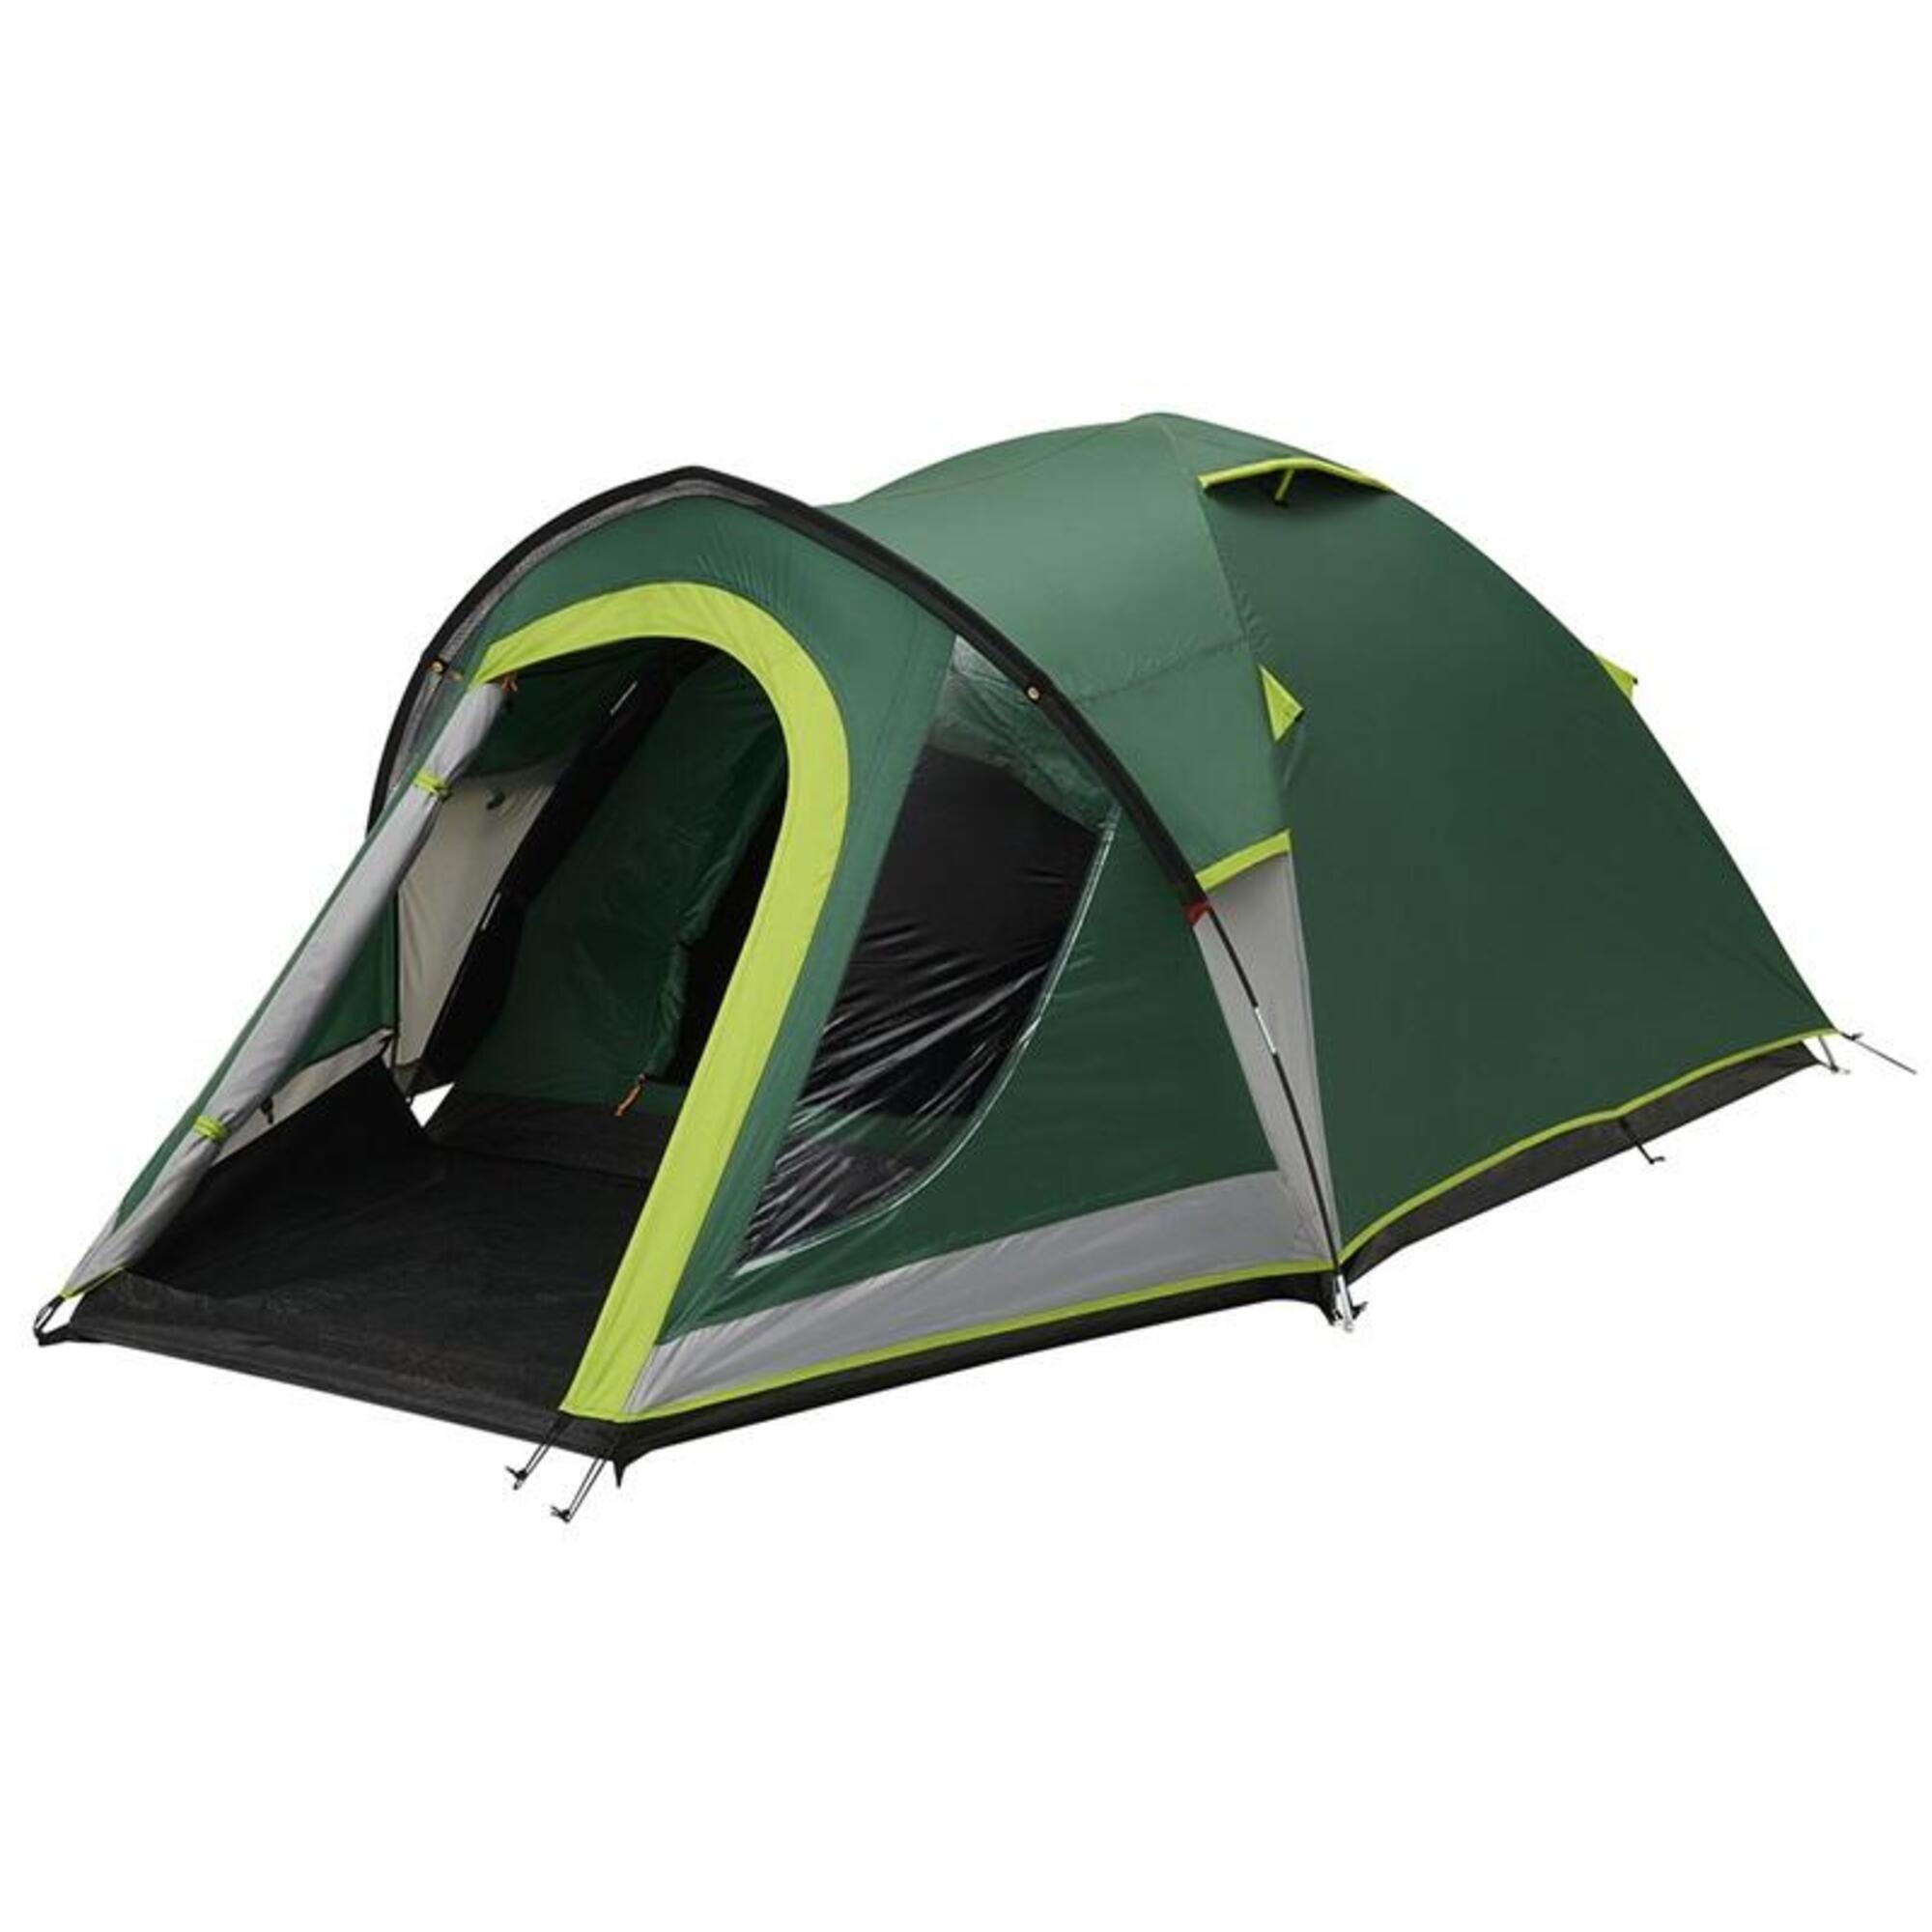 Coleman BlackOut Bedroom Kobuk Valley 4 Person Camping Tent Green 1/6